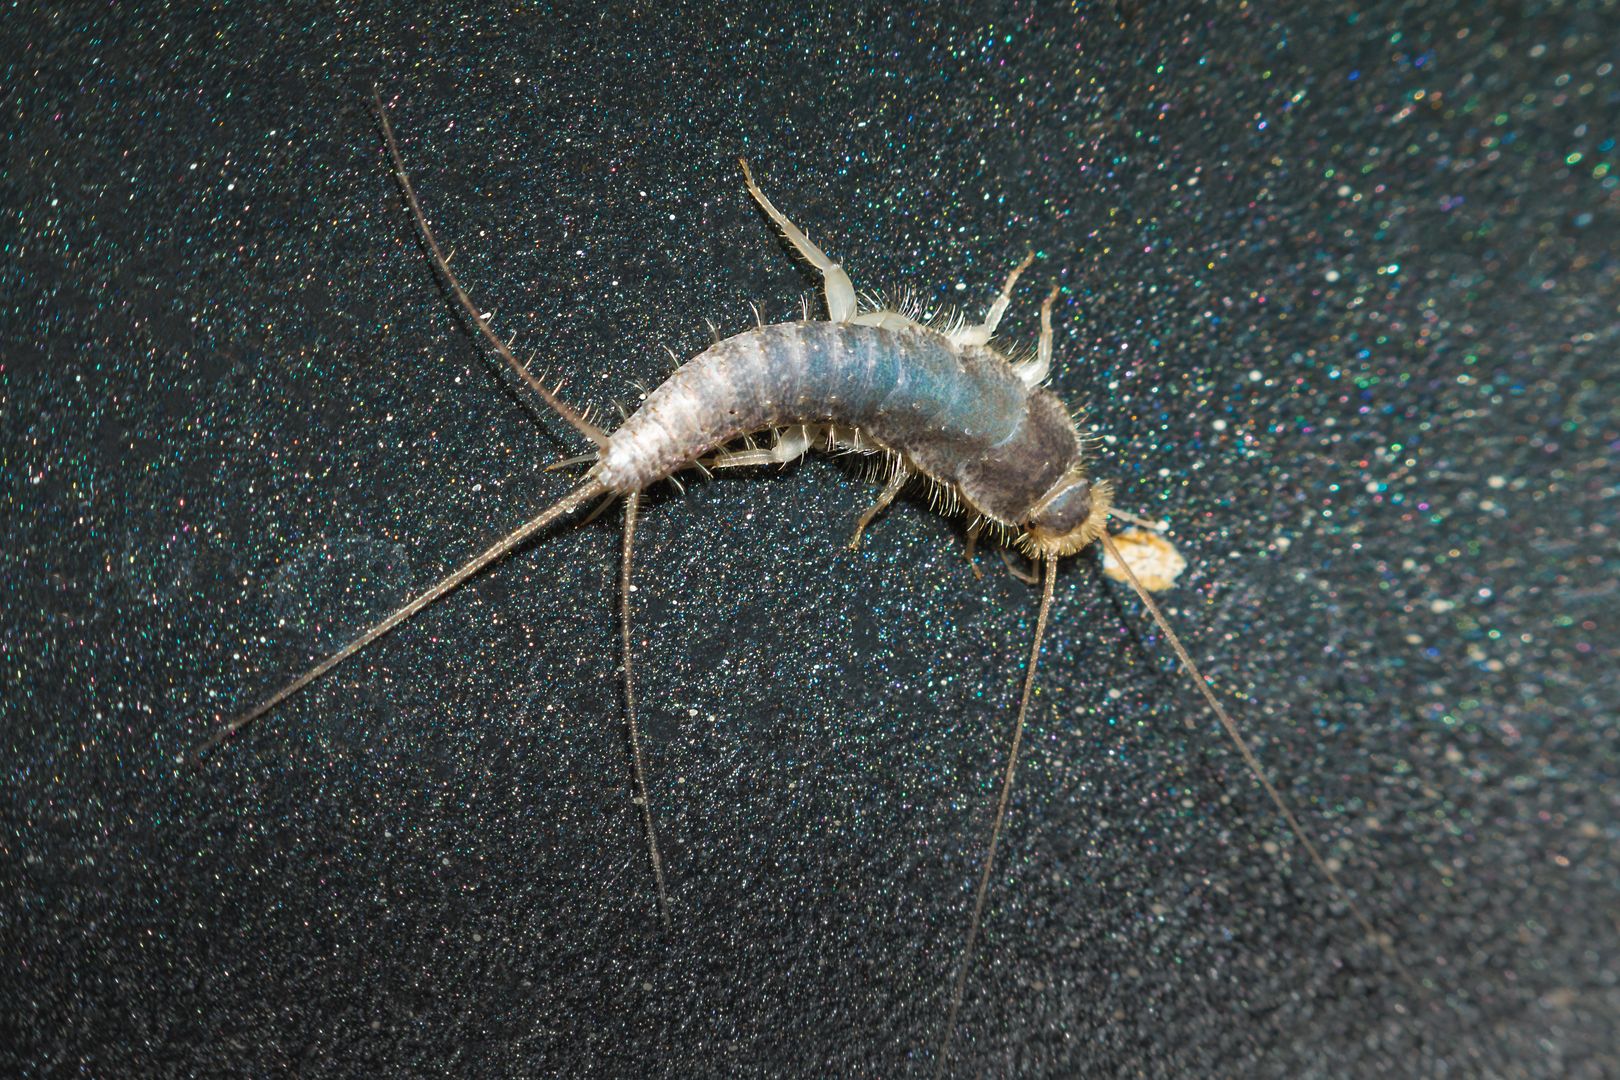 Avoid silverfish infestation at home with these simple deterrents